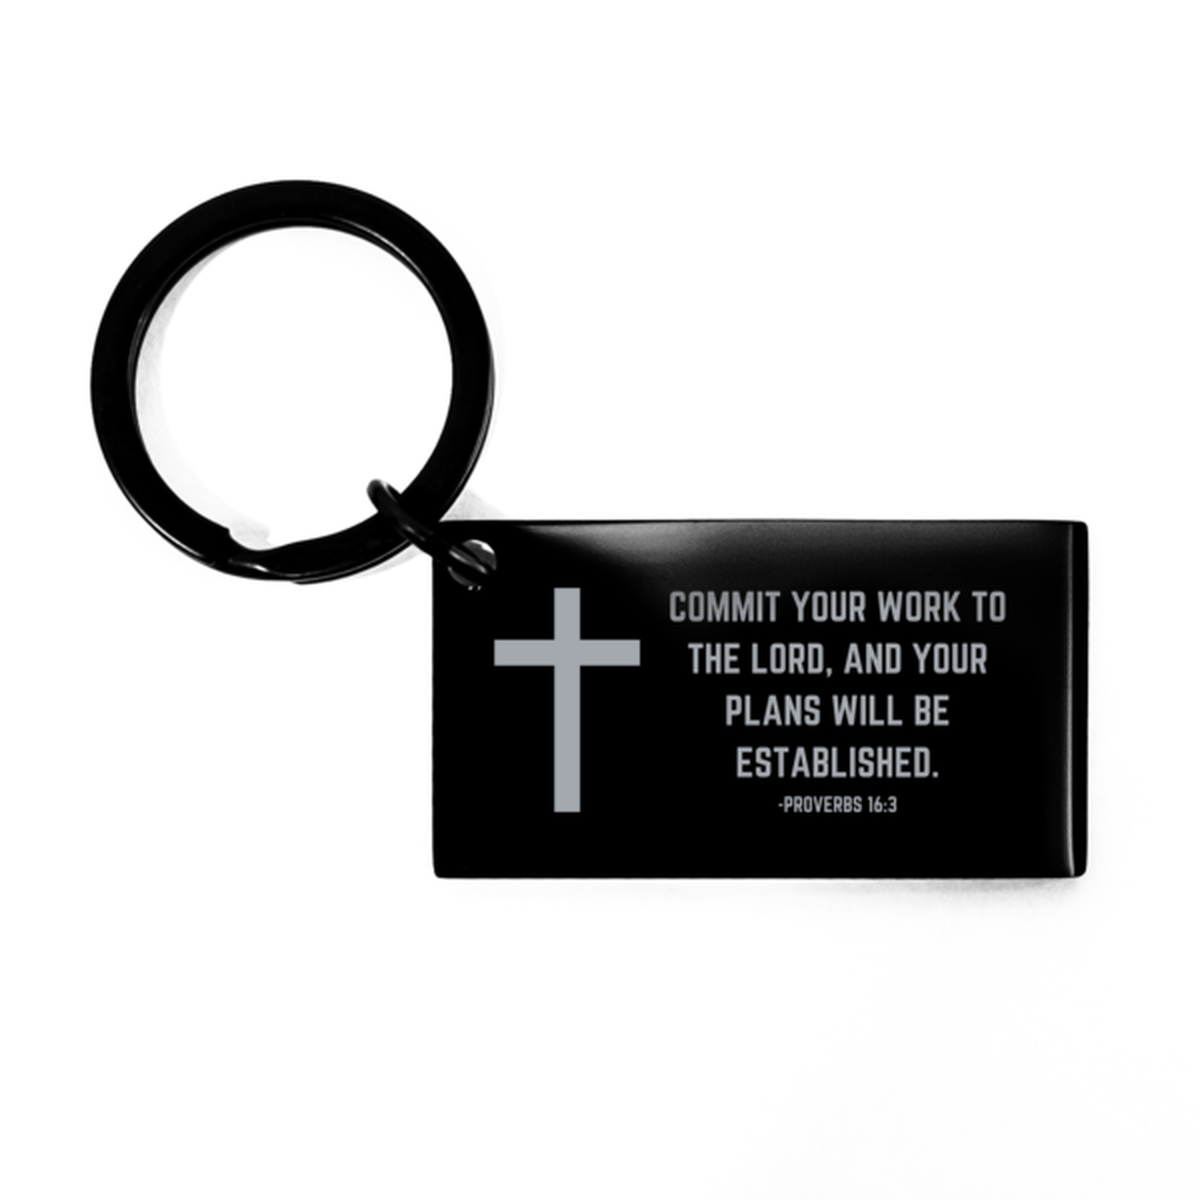 Baptism Gifts For Teenage Boys Girls, Christian Bible Verse Black Keychain, Commit your work to the Lord, Confirmation Gifts, Bible Verse Keyring for Son, Godson, Grandson, Nephew